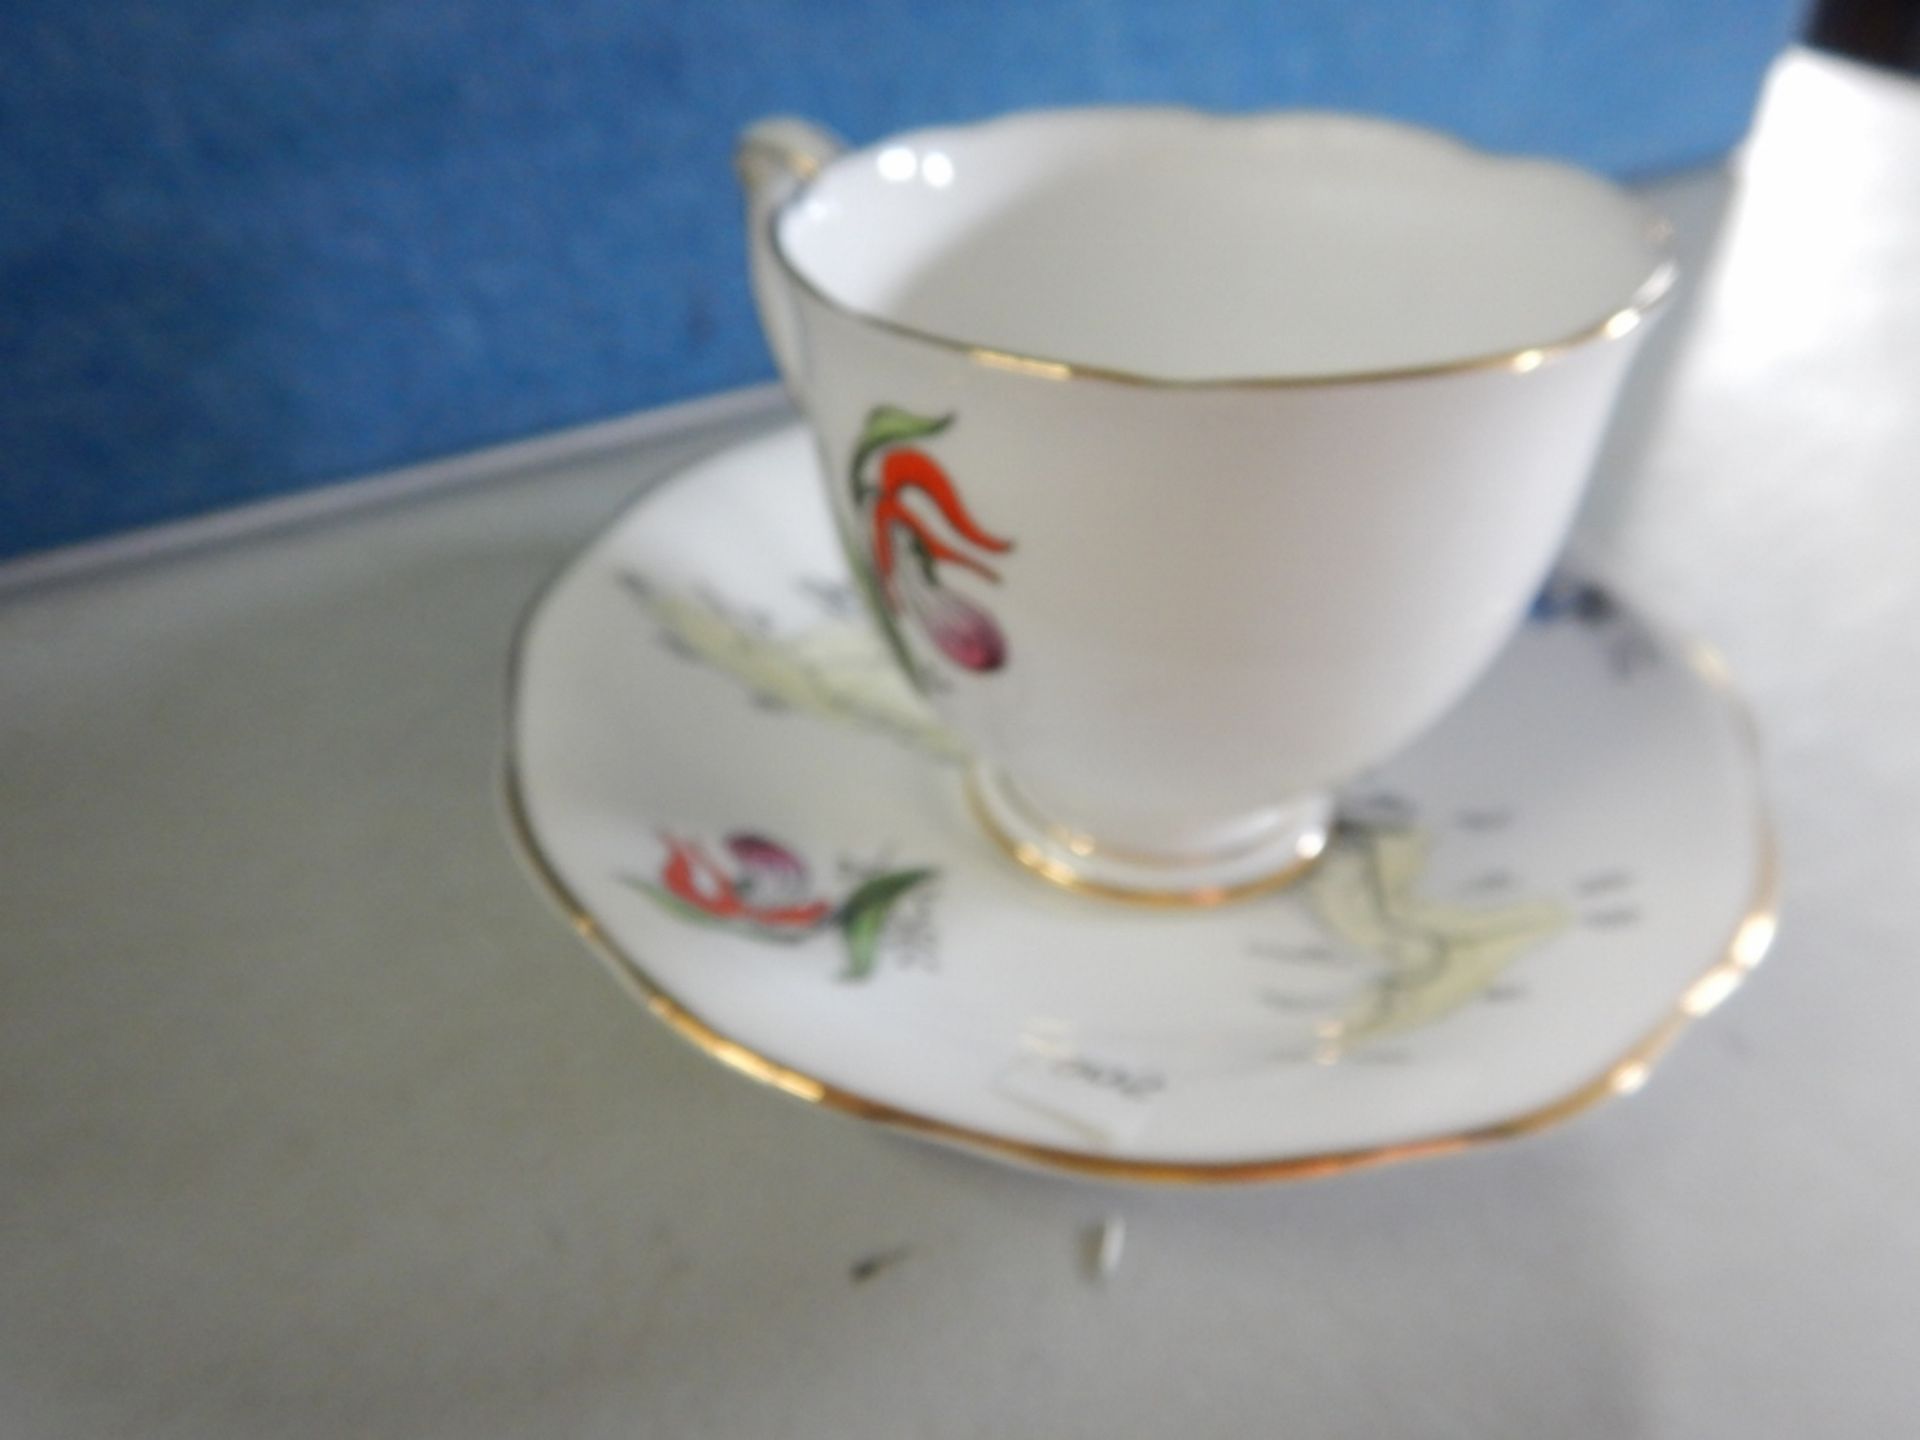 ANTIQUE TEACUPS & SAUCERS - MADE IN ENGLAND - LOT OF 3 - FINE BONE CHINA "PRINCE EDWARD ISLAND" - - Image 12 of 15